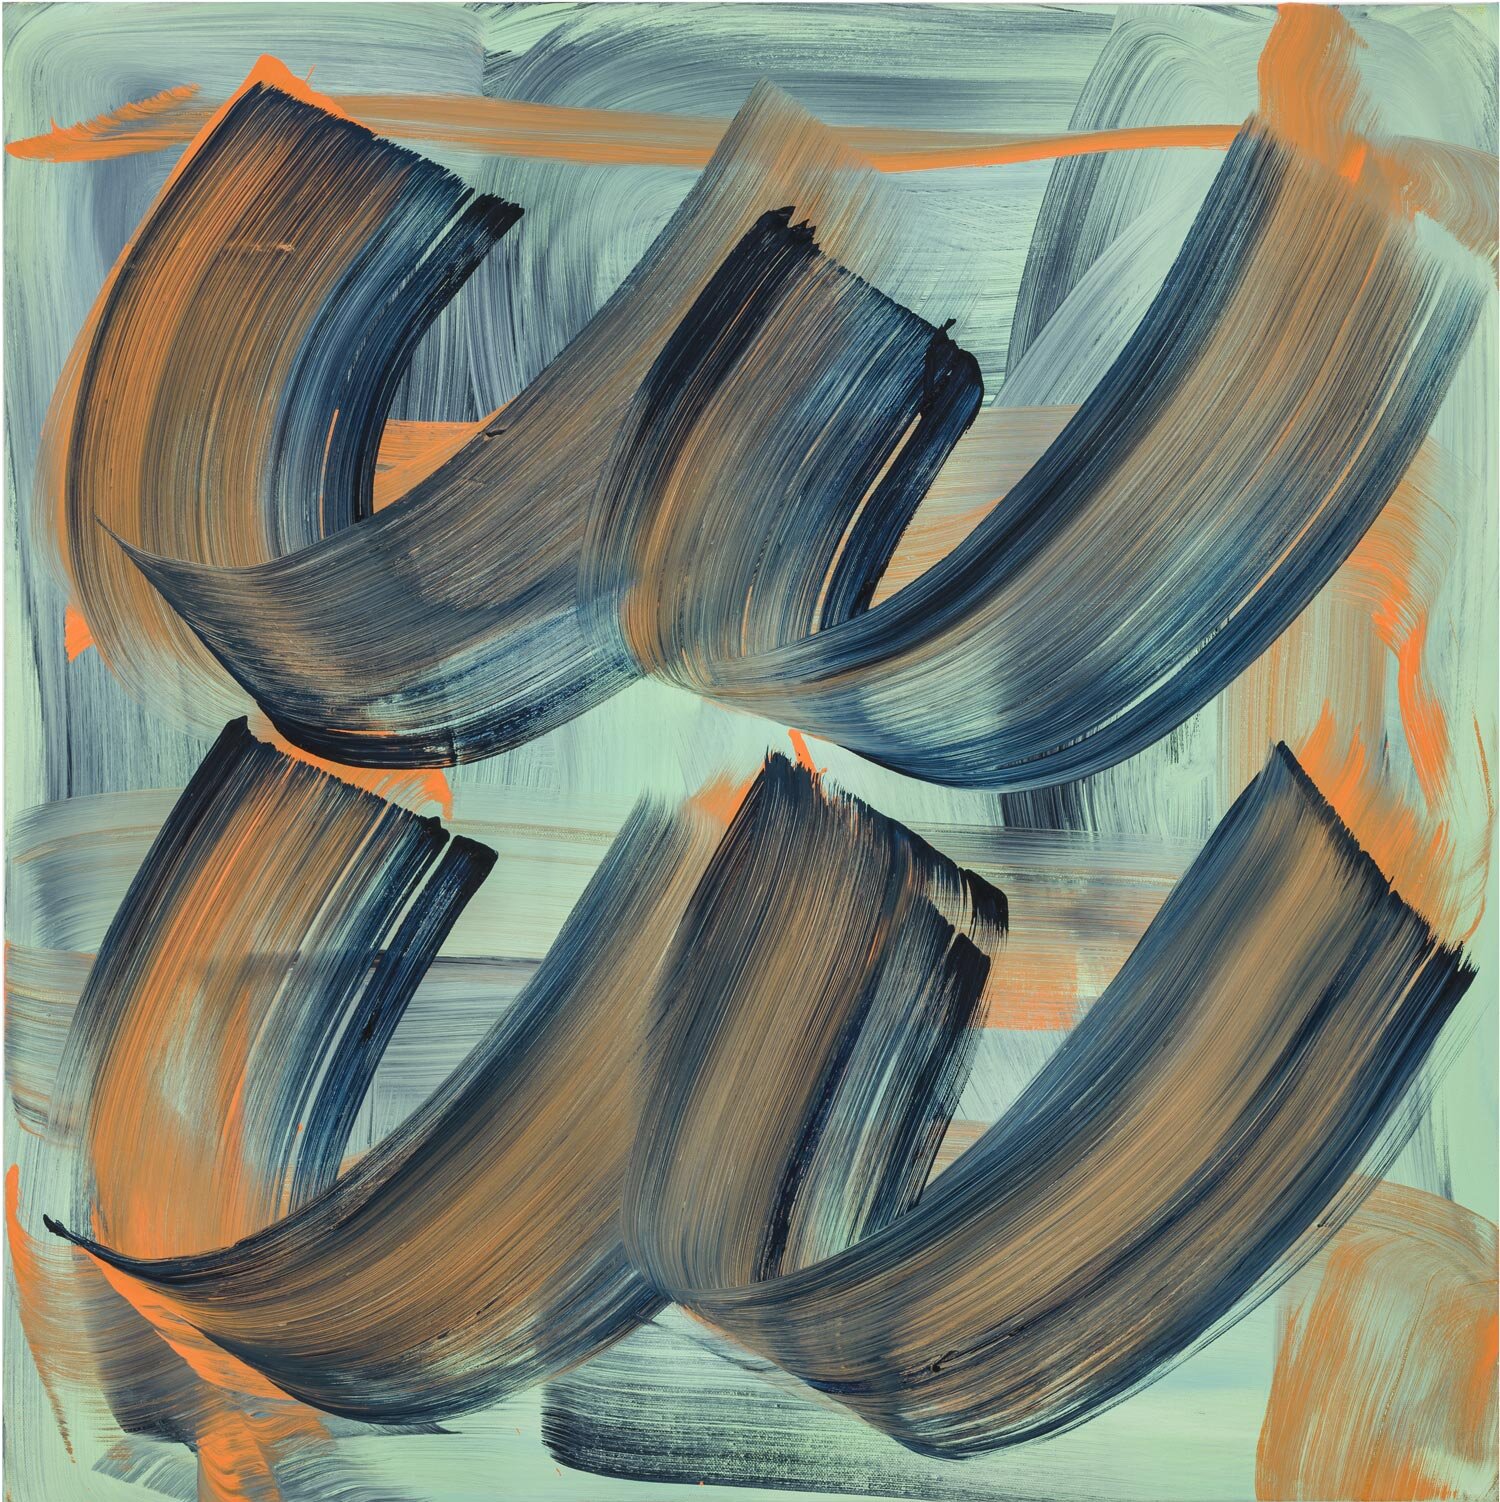  Shorthand, 2021 oil on canvas 30 x 30 in. 